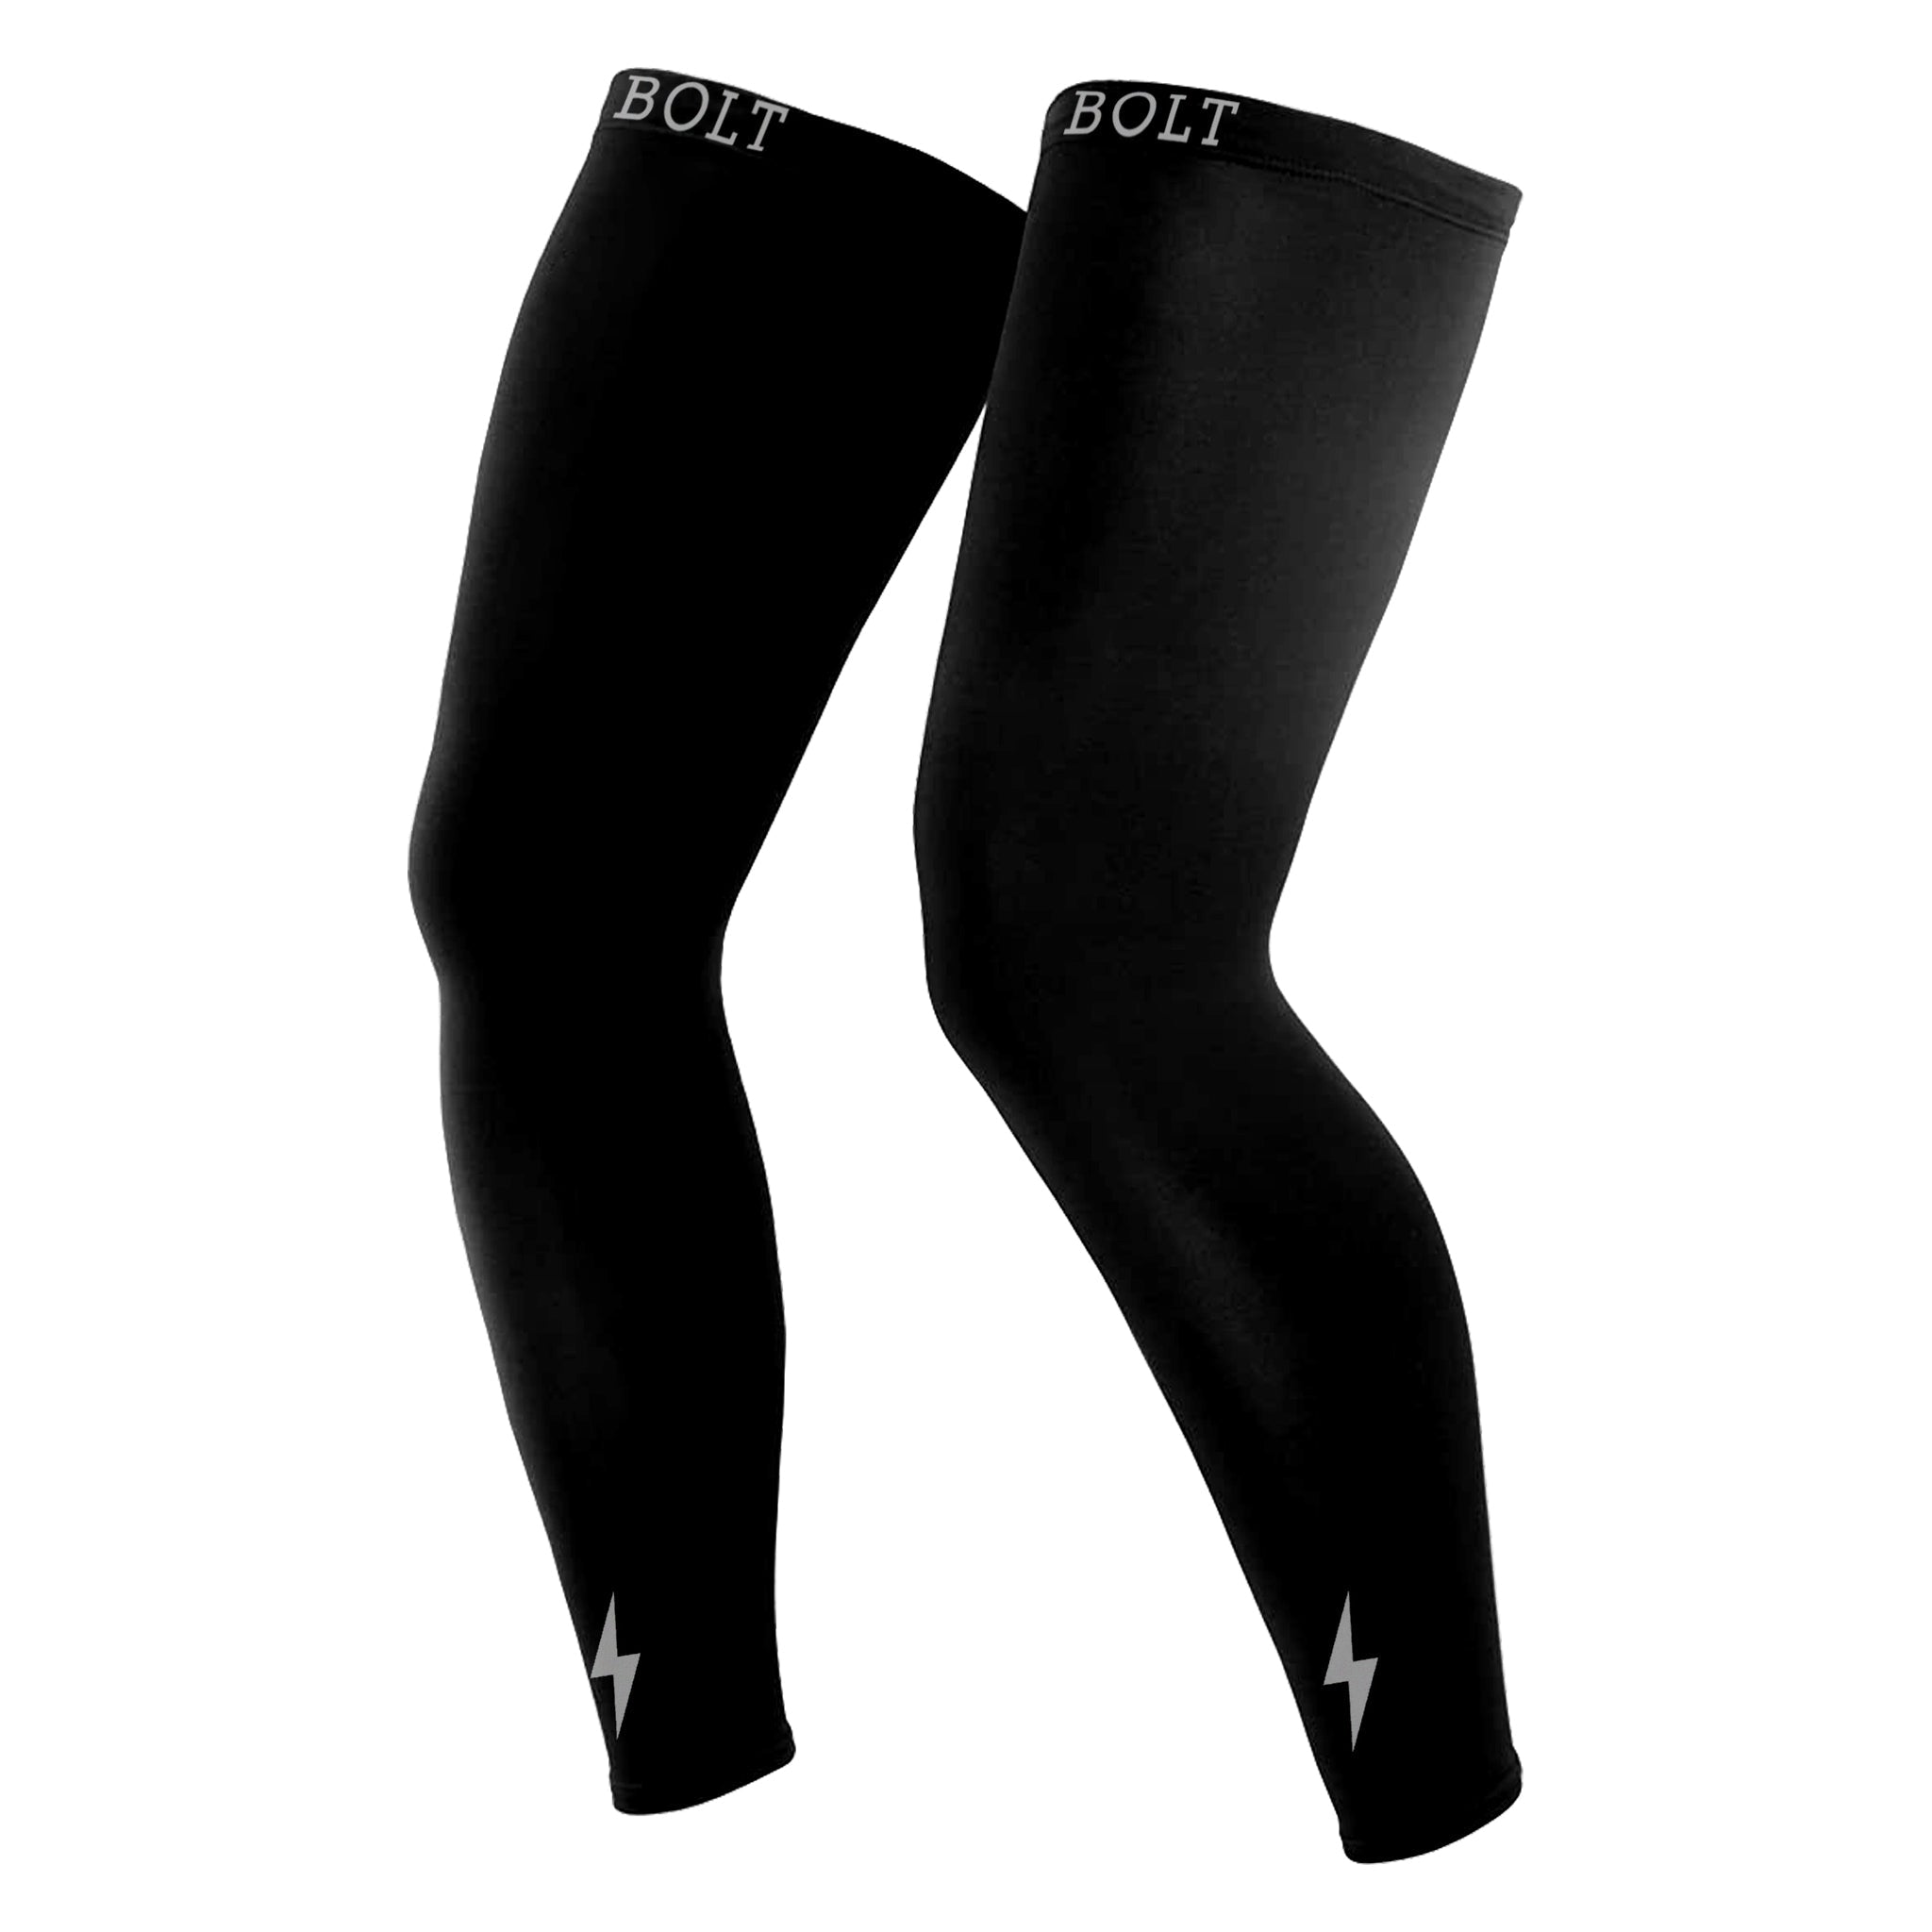 Image of BRUCE BOLT Xtra Long Compression Leg Sleeves (pair) - BLACK